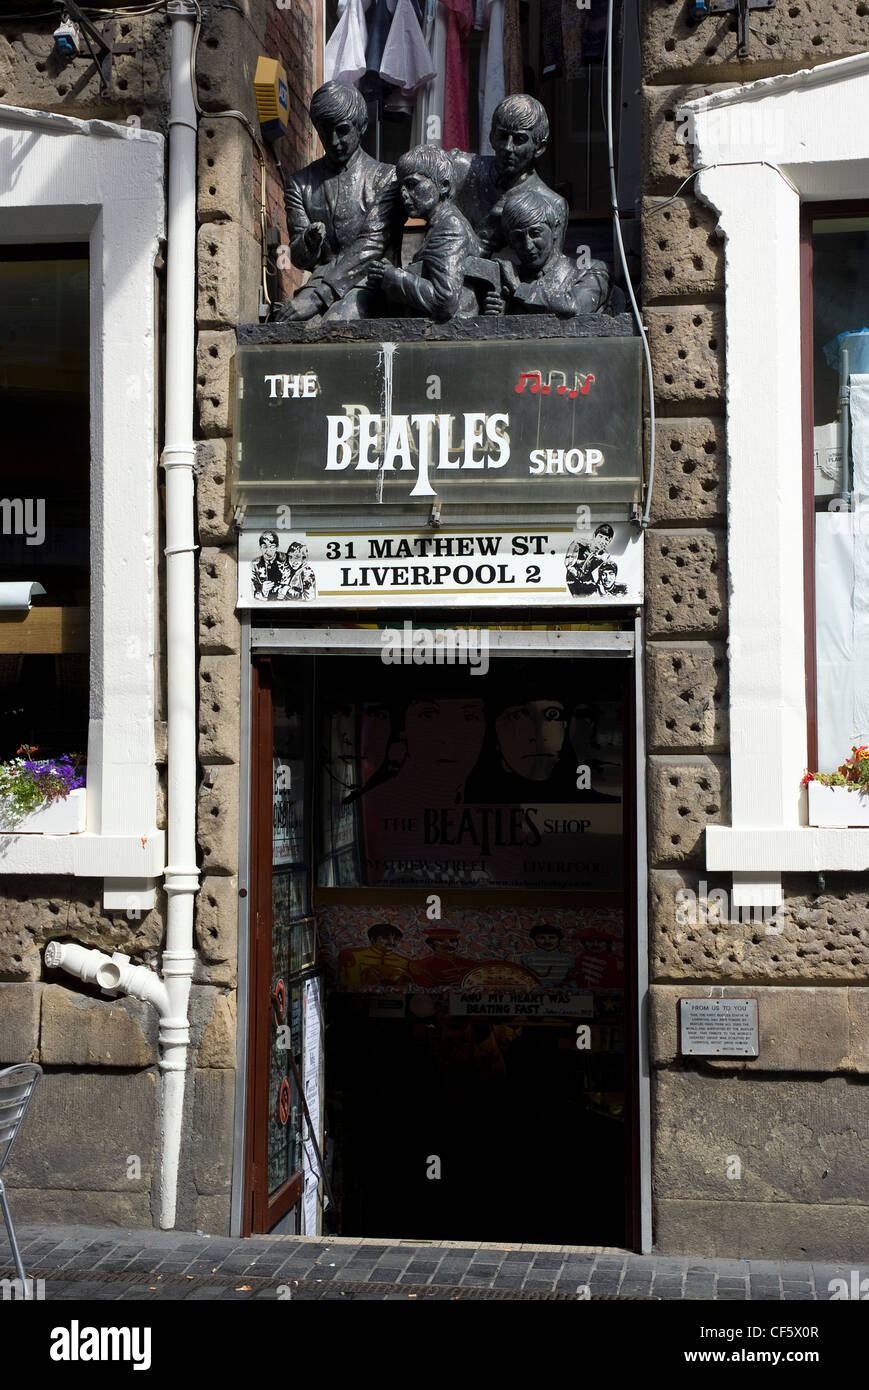 The entrance to The Beatles Shop on Mathew Street. Stock Photo